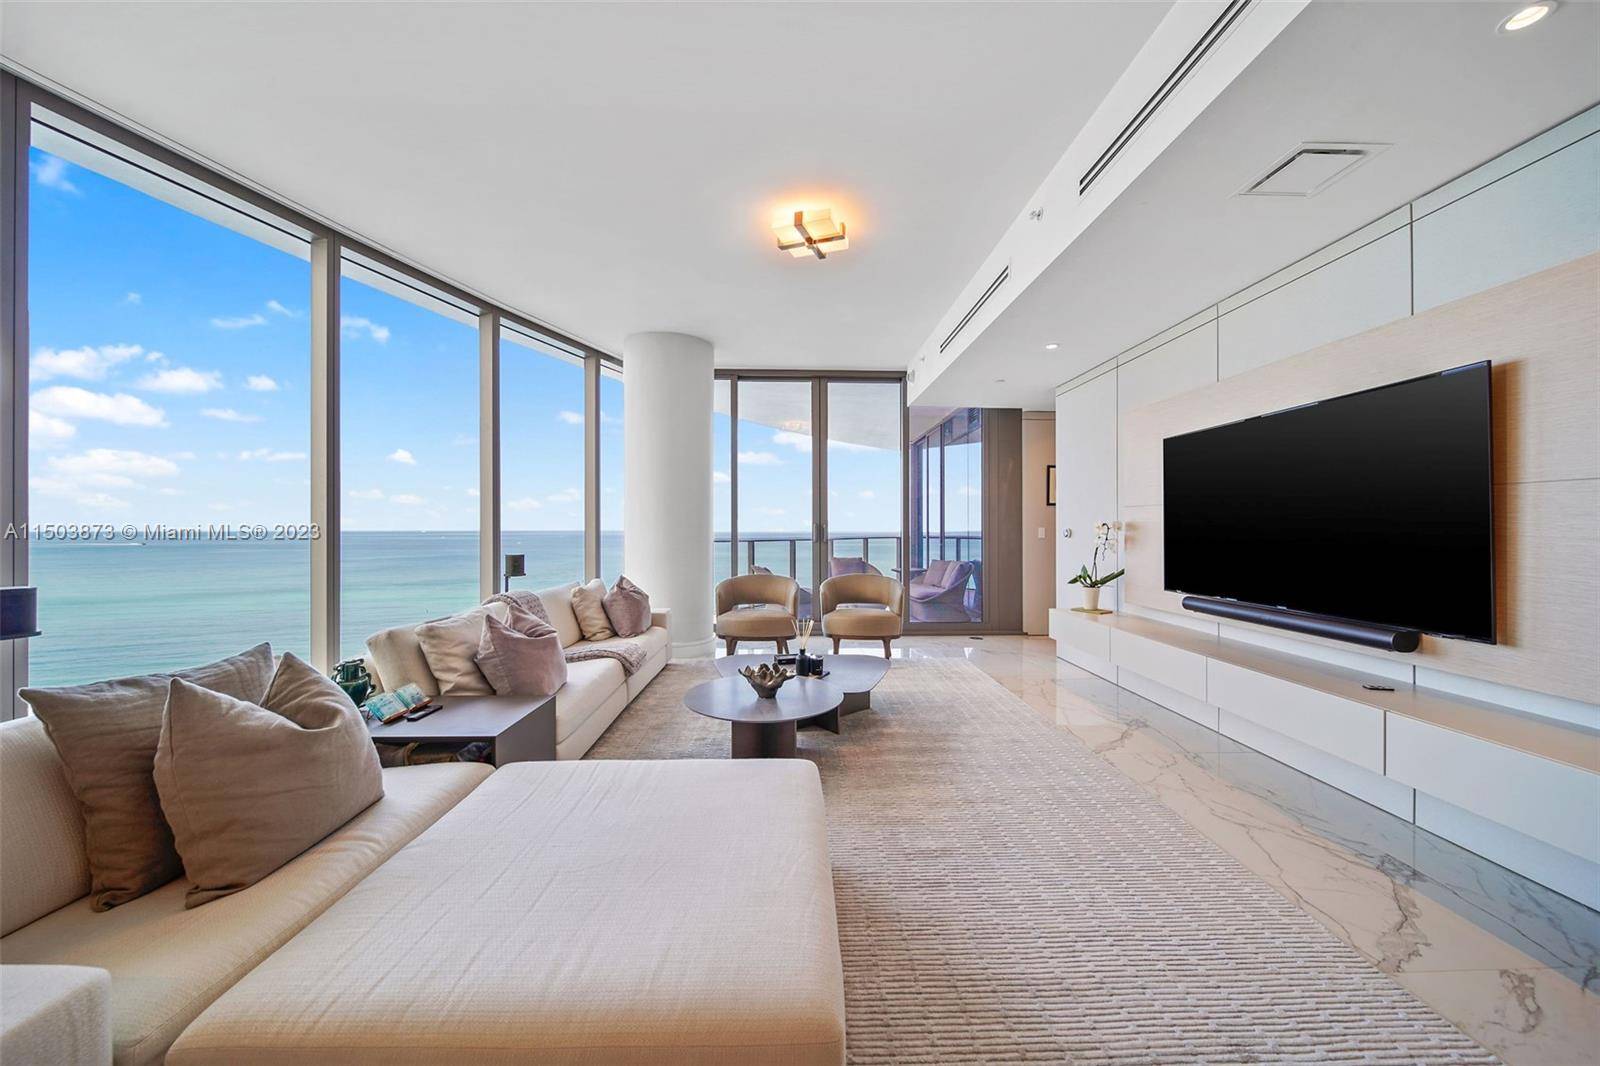 Welcome to the epitome of luxury living at The Ritz Carlton Sunny Isles, where this exquisite flow through 4 bed 4.